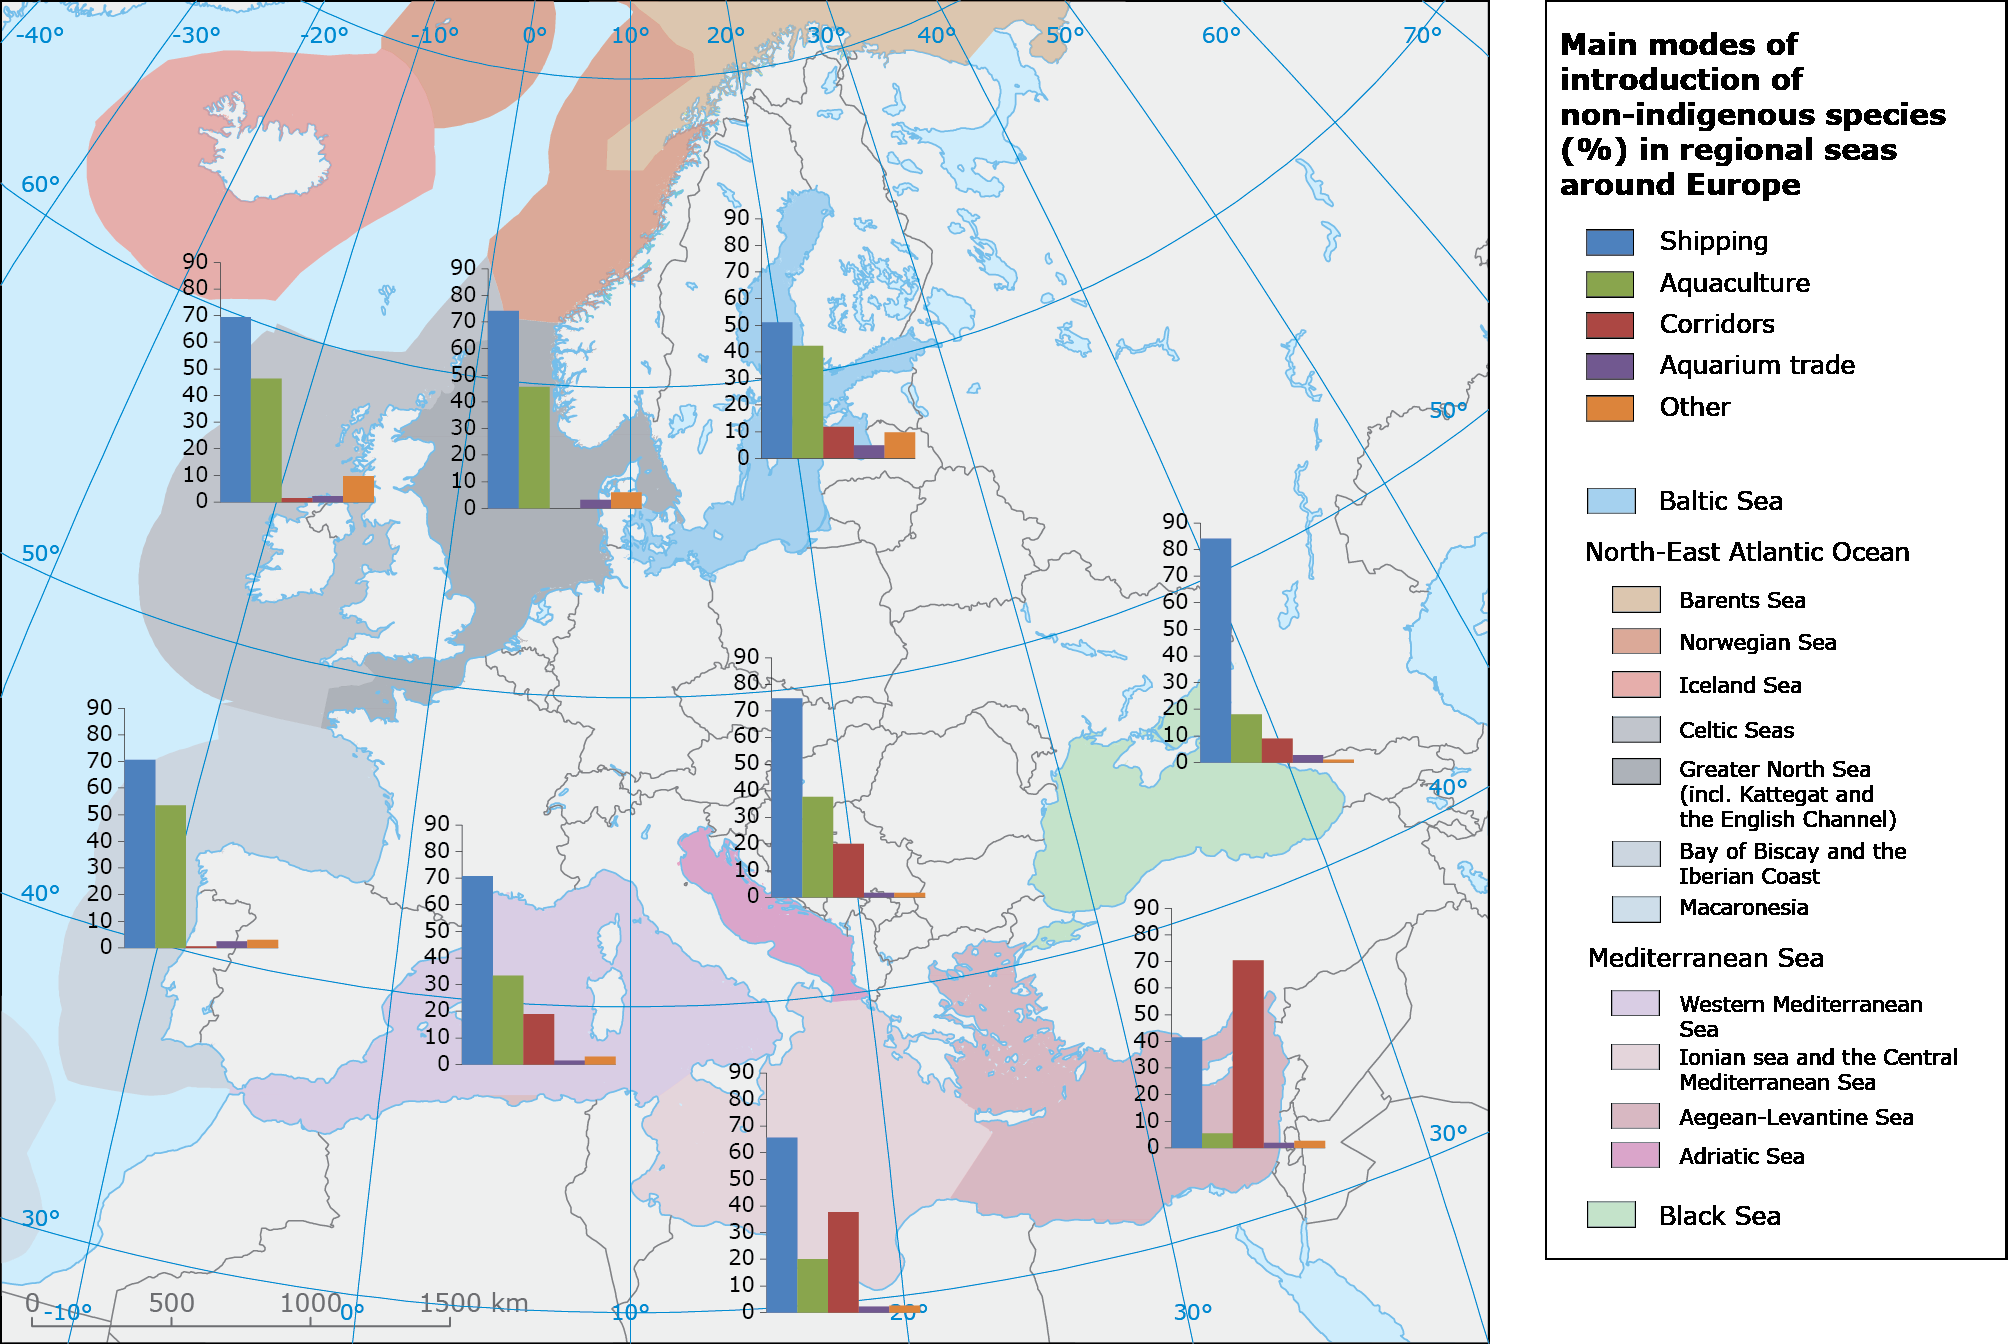 Main pathways of introduction of marine non-indigenous species in regional seas of Europe